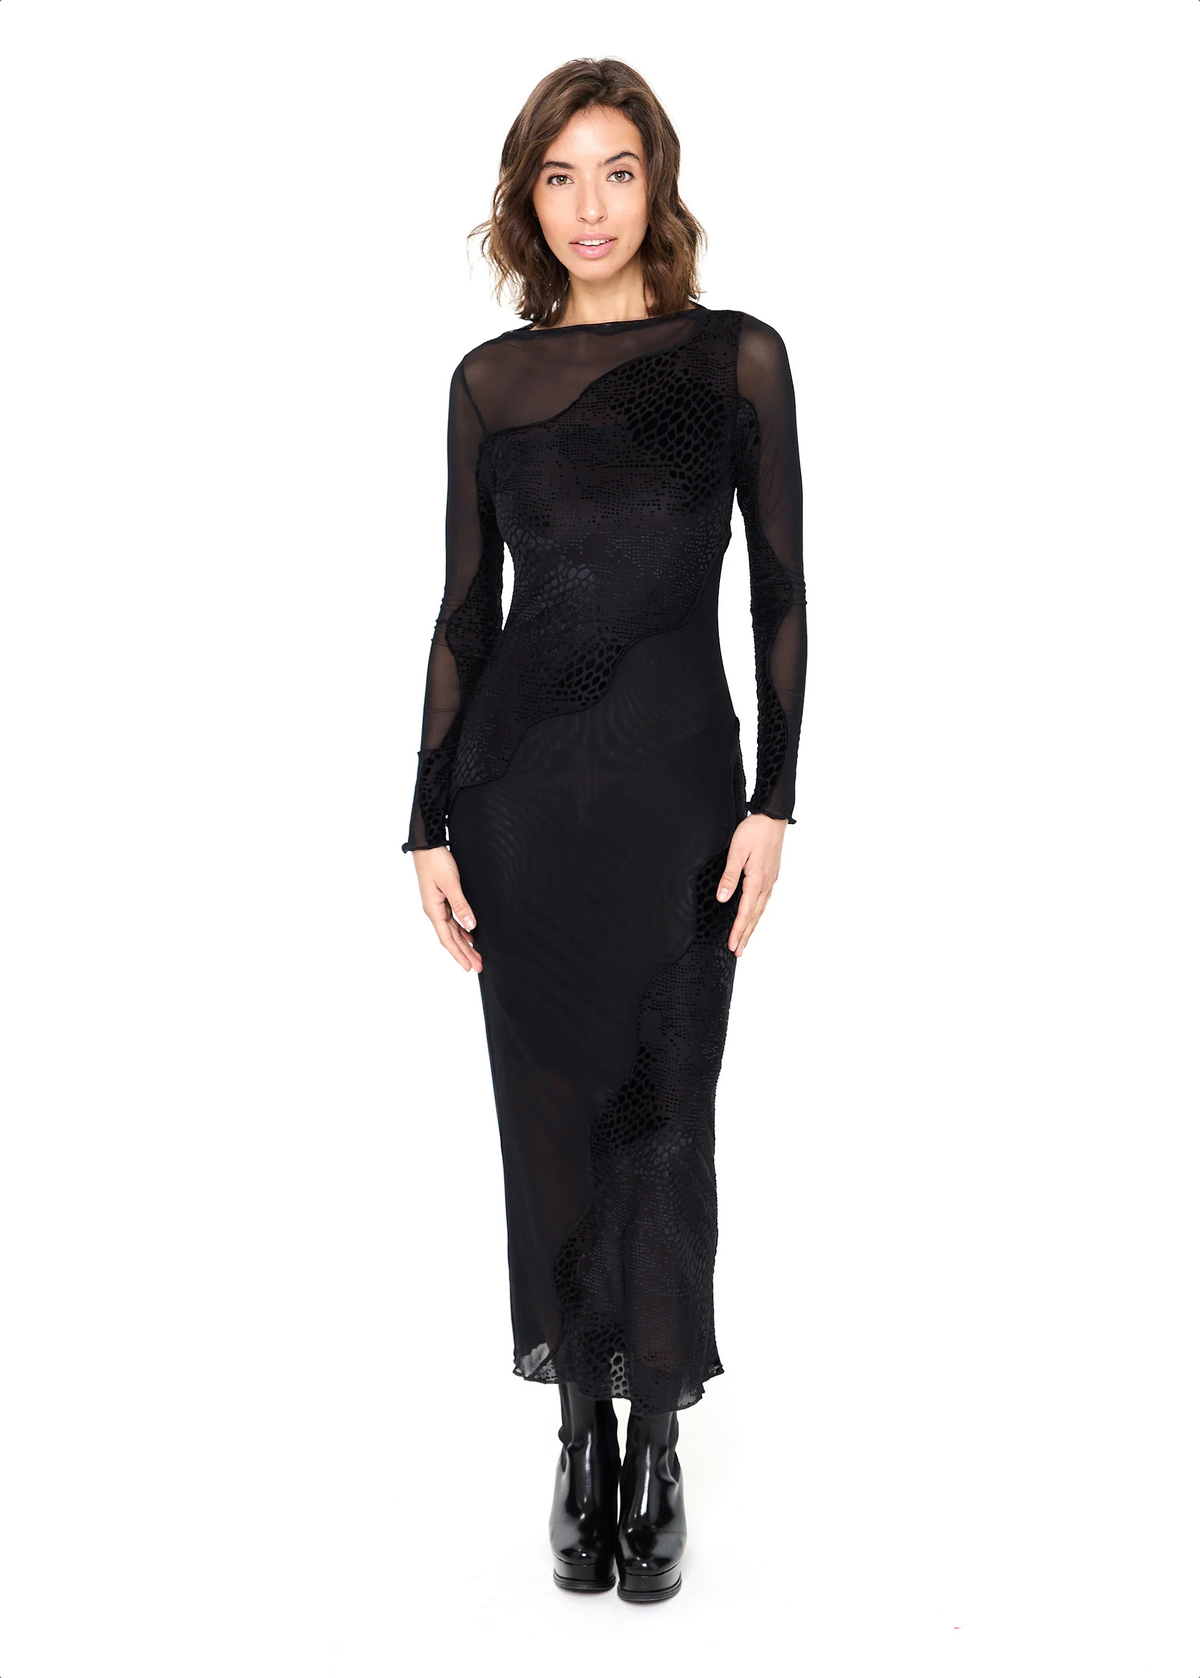 Black Gothic Slinky Stretch Mesh and Flocked Crocodile Expose Velvet Panel Long Sleeve Maxi Dress by Another Girl UK, ethically made with recycled materials